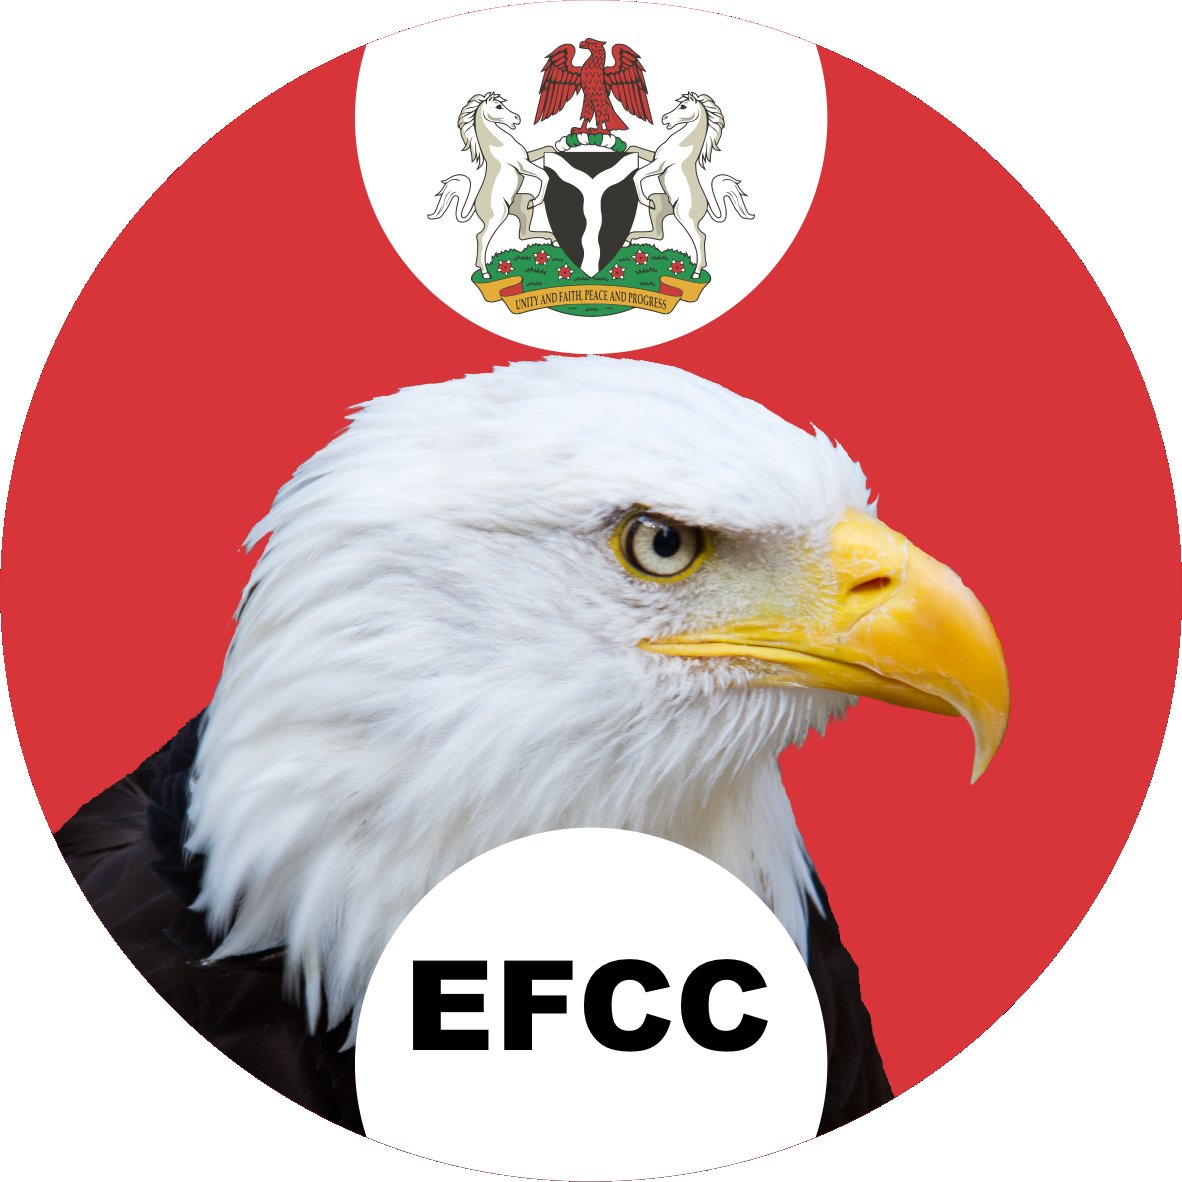 Kudos to the EFCC efforts on the abuse of Naira, especially at the social events. People doing legitimate work would hardly abuse Naira. It's people that earn money by illegal means that usually engage in this act; and a clue to further investigate the sources of their 'wealth'.